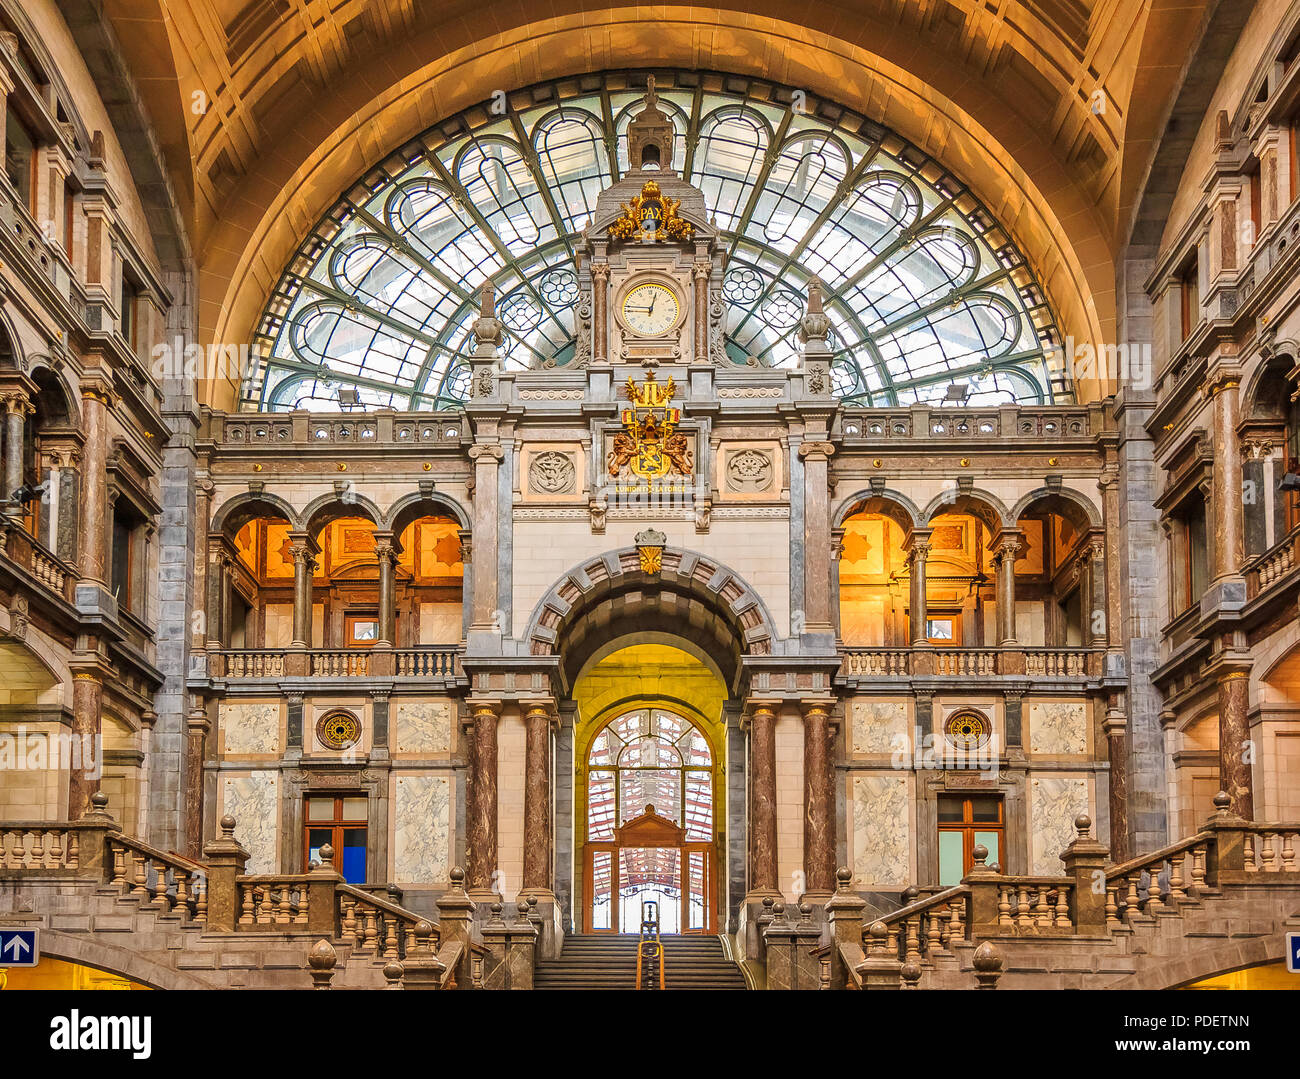 Antwerp, Belgium - January 18, 2015: Hall of the famous restored Antwerp Central Train Station Stock Photo